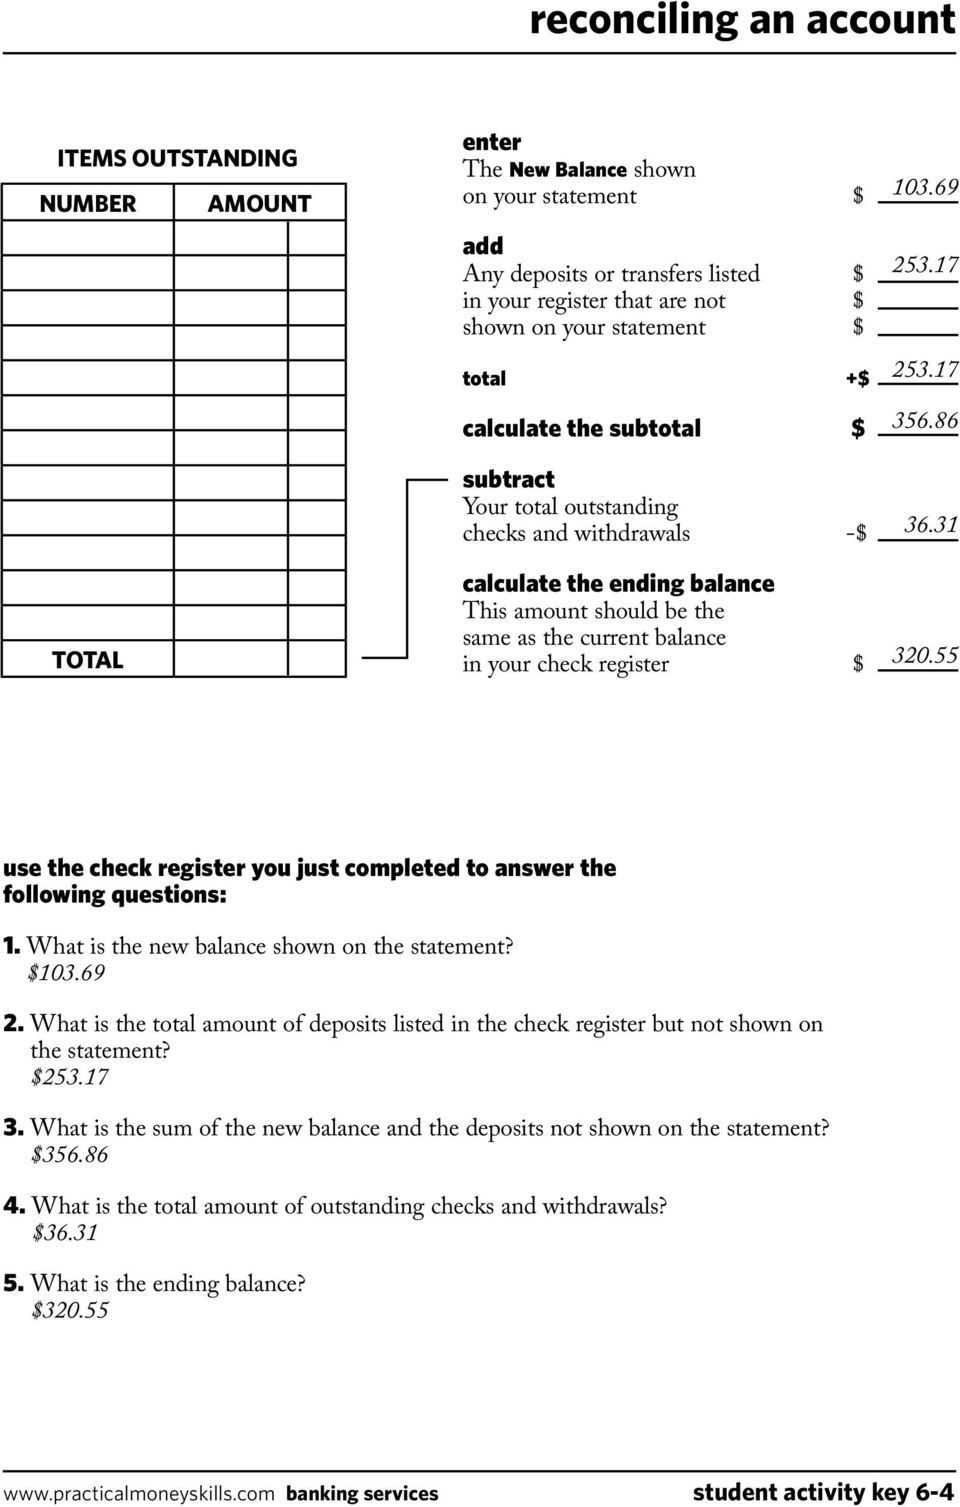 keeping a running balance answer key - PDF Free Download Pertaining To Reconciling A Bank Statement Worksheet